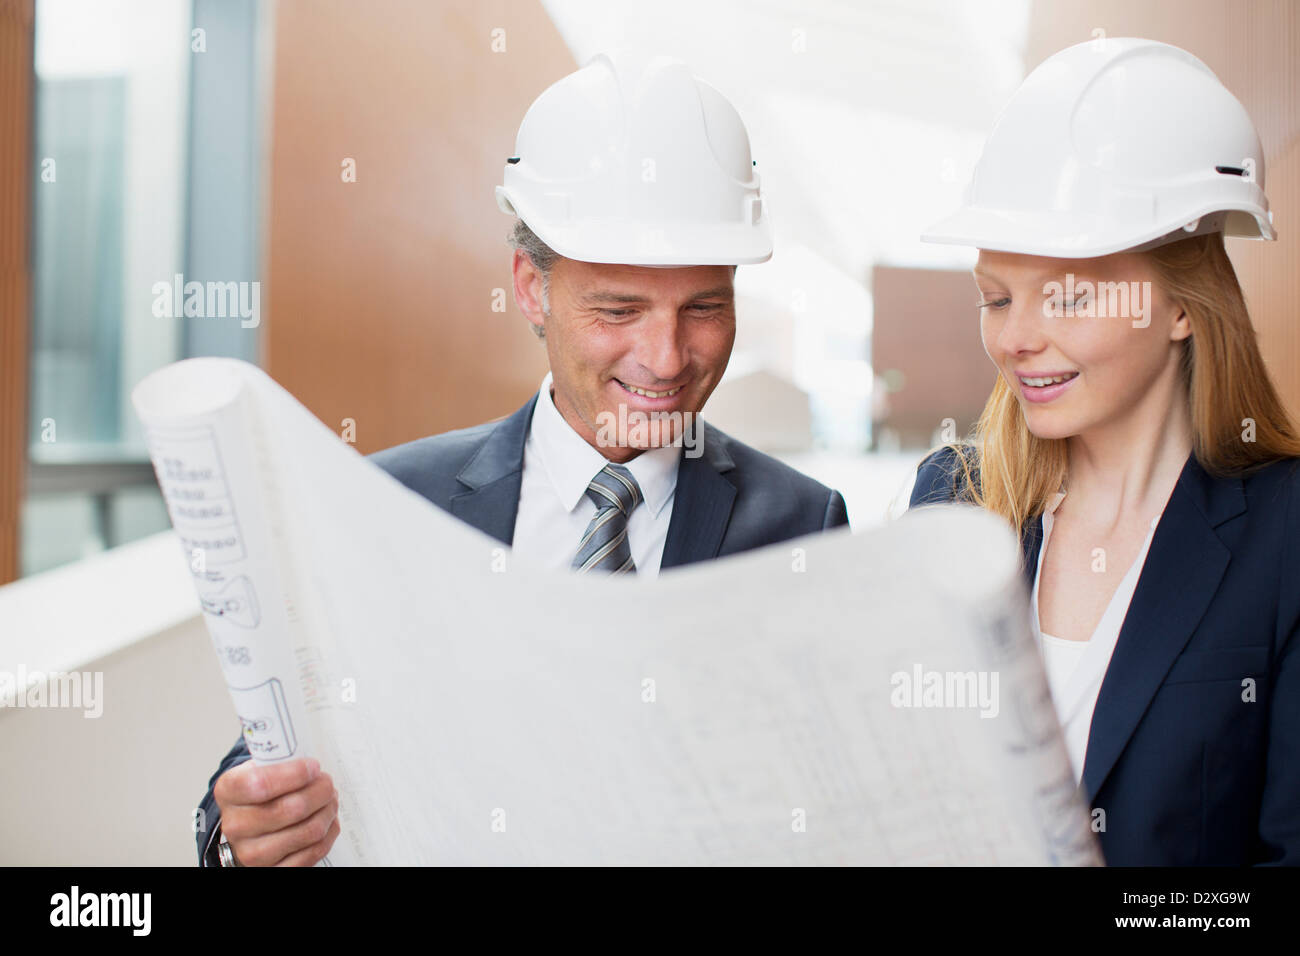 Architects wearing hard-hats and reviewing blueprints Stock Photo